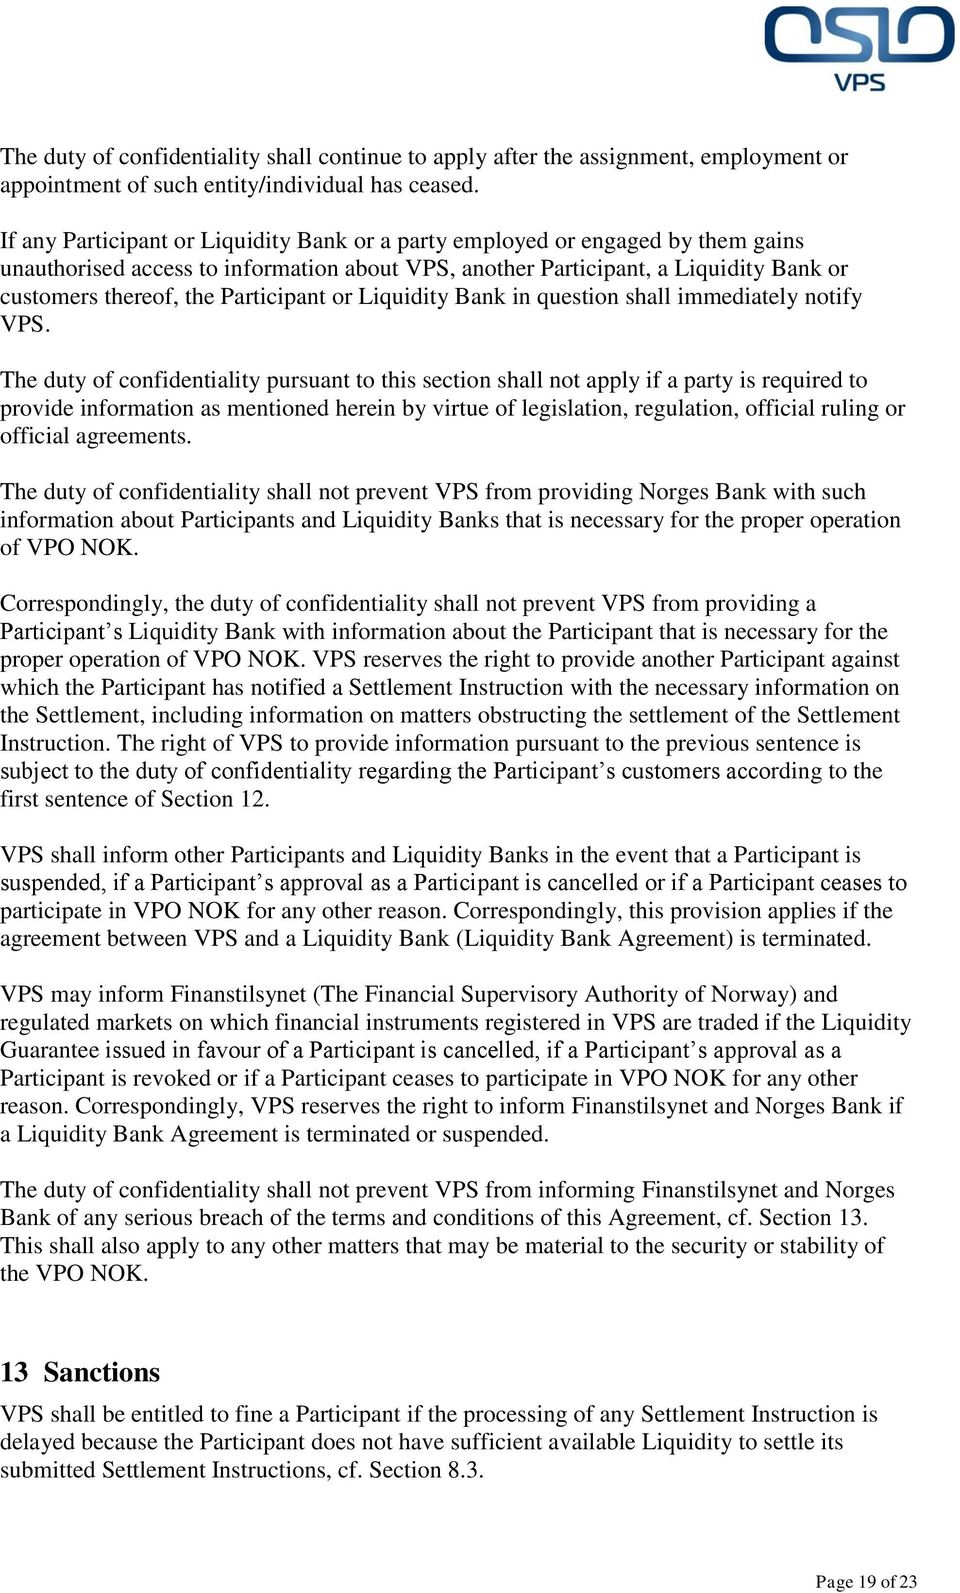 Participant or Liquidity Bank in question shall immediately notify VPS.